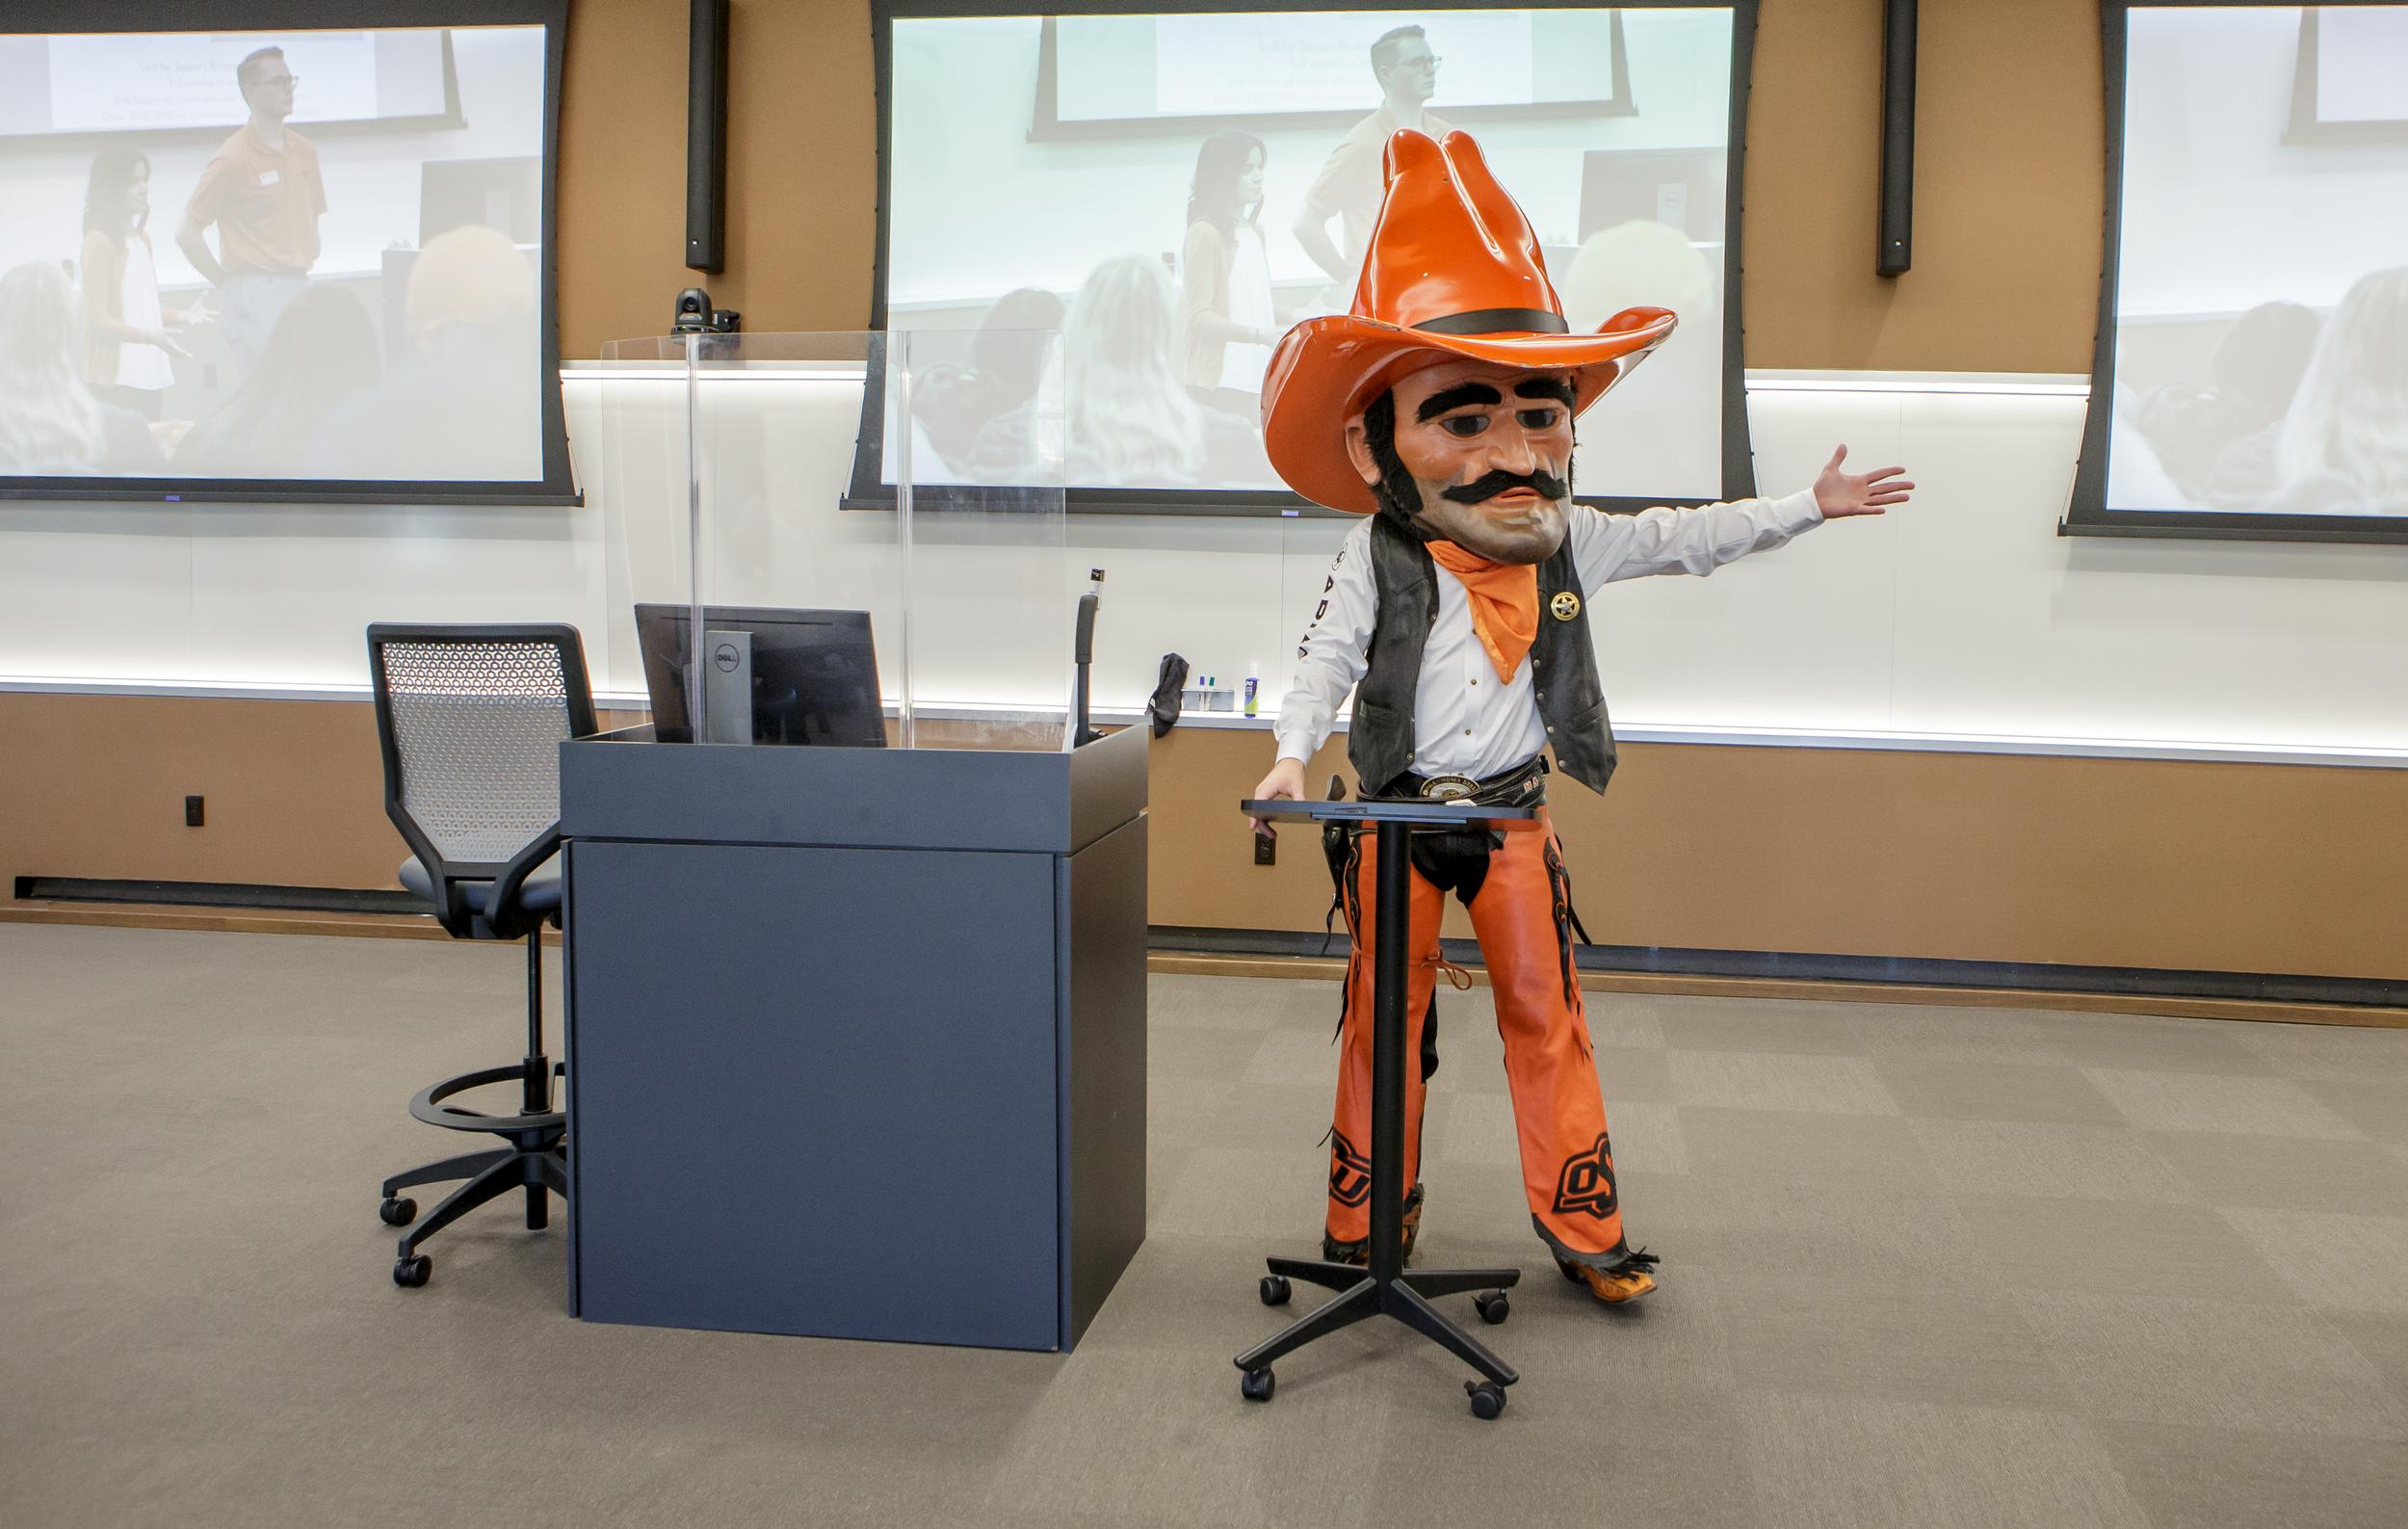 Pistol Pete is speaking to an audience and gesturing to his left by putting his arm out to the side.